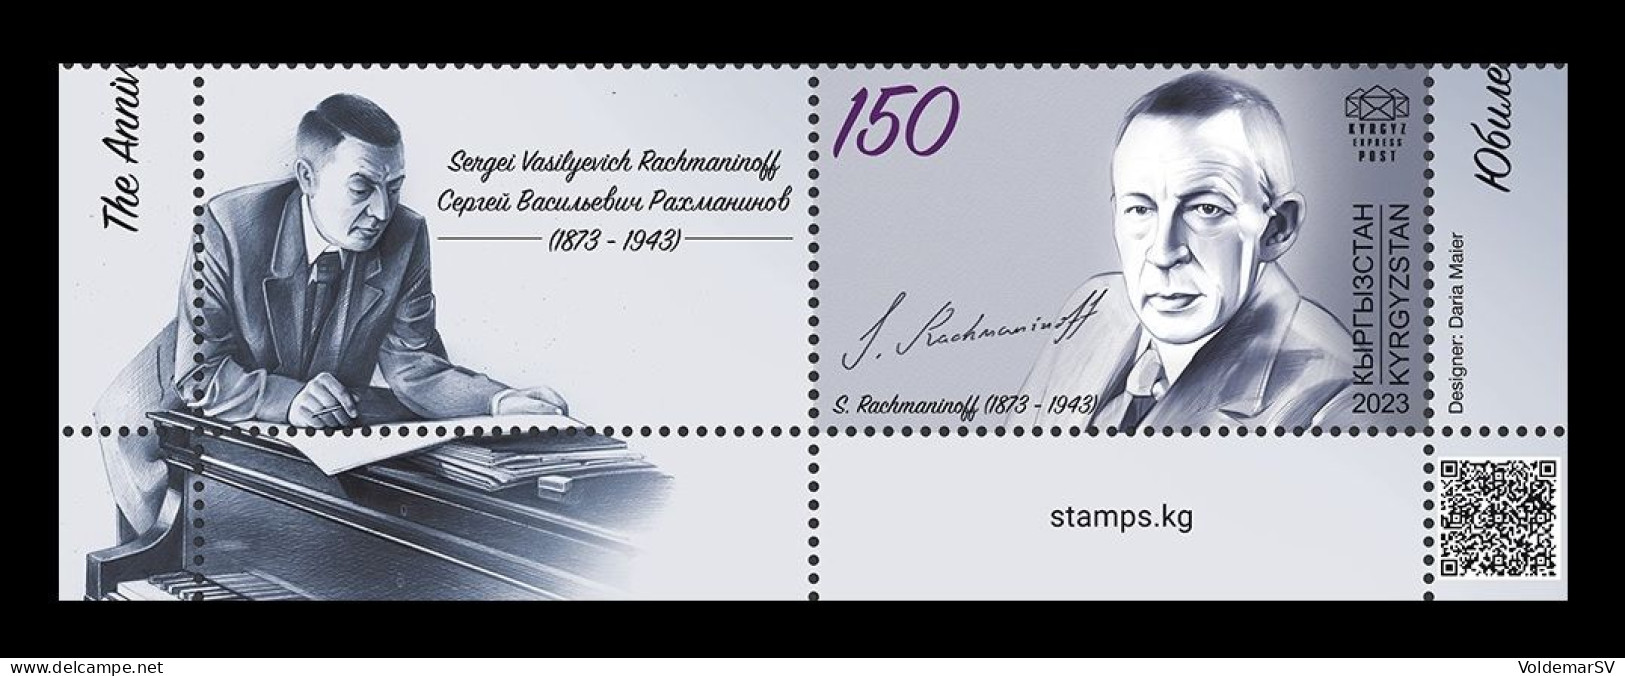 Kyrgyzstan (KEP) 2024 Mih. 224 Music. Composer Sergei Rachmaninoff (with Label) MNH ** - Kirghizistan